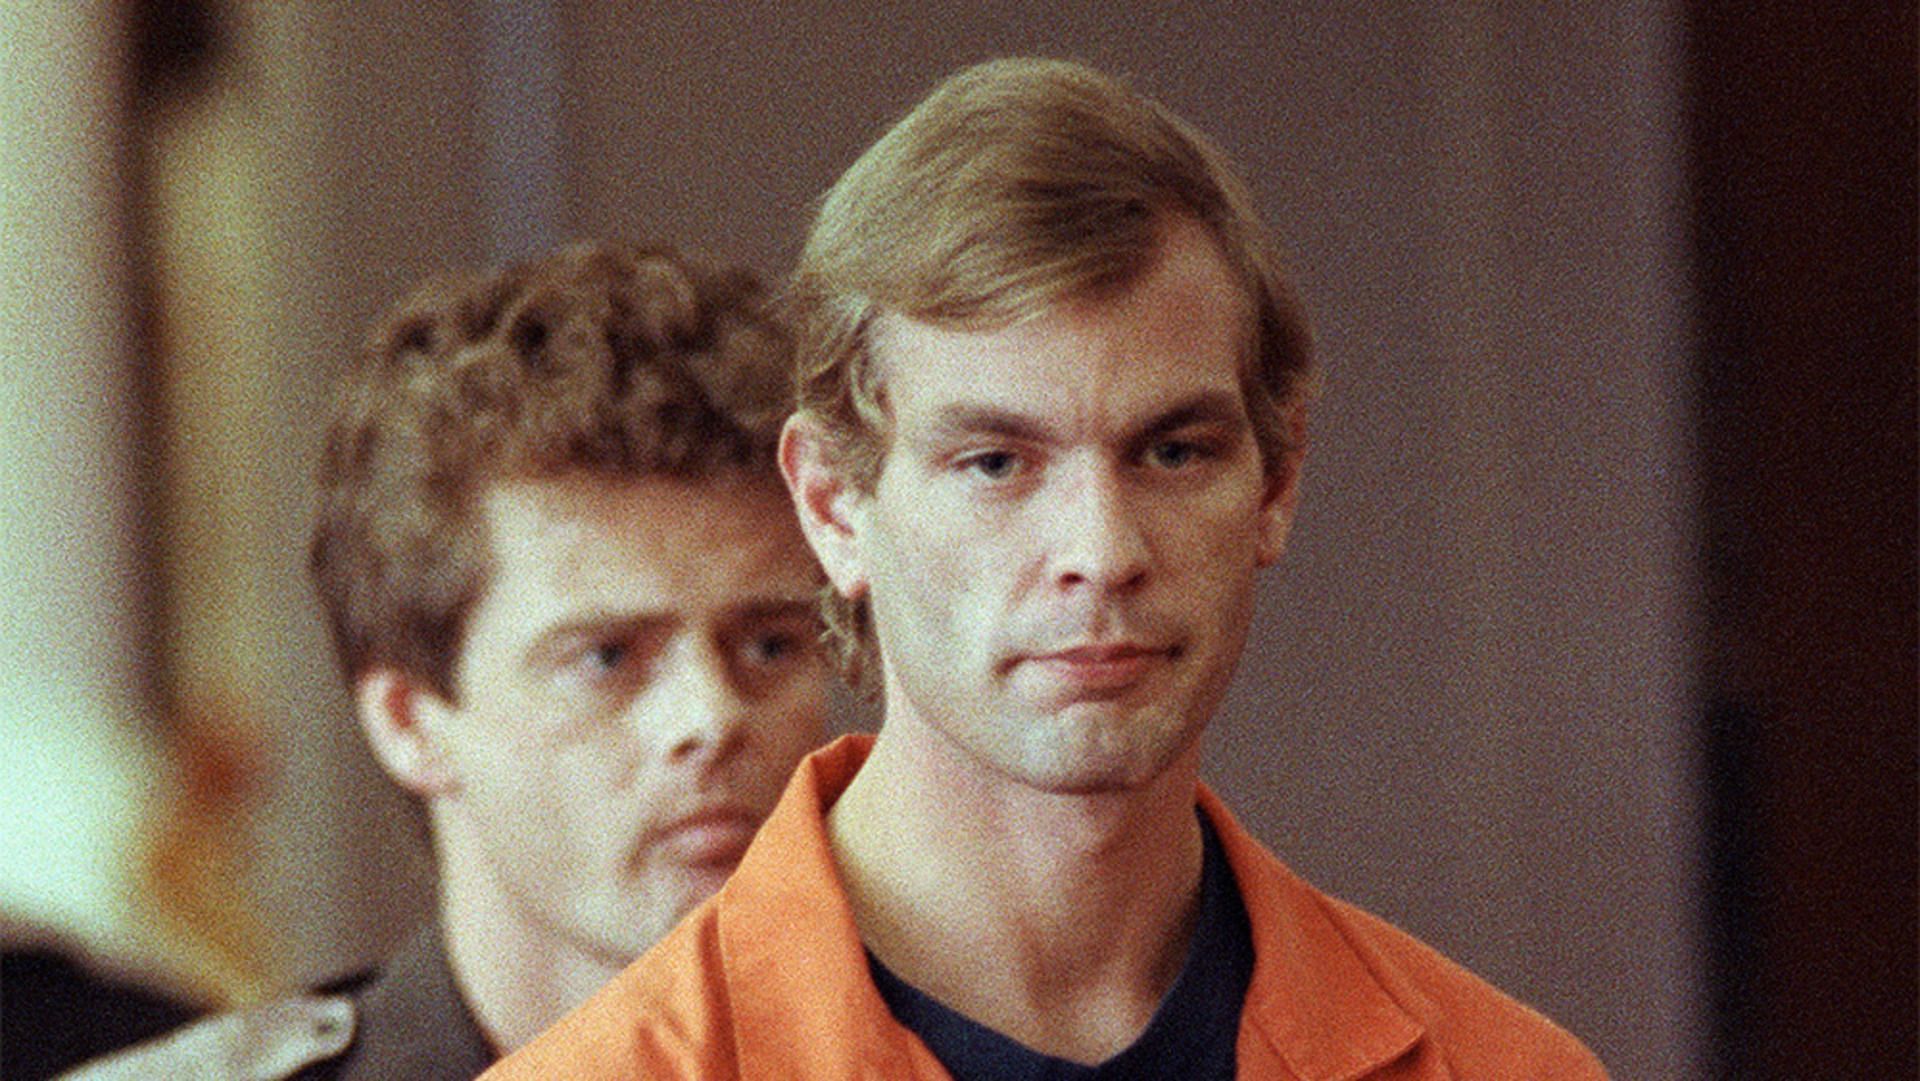 Jeffrey Dahmer photobombed The National Honors Society yearbook picture (Image via Getty Images)